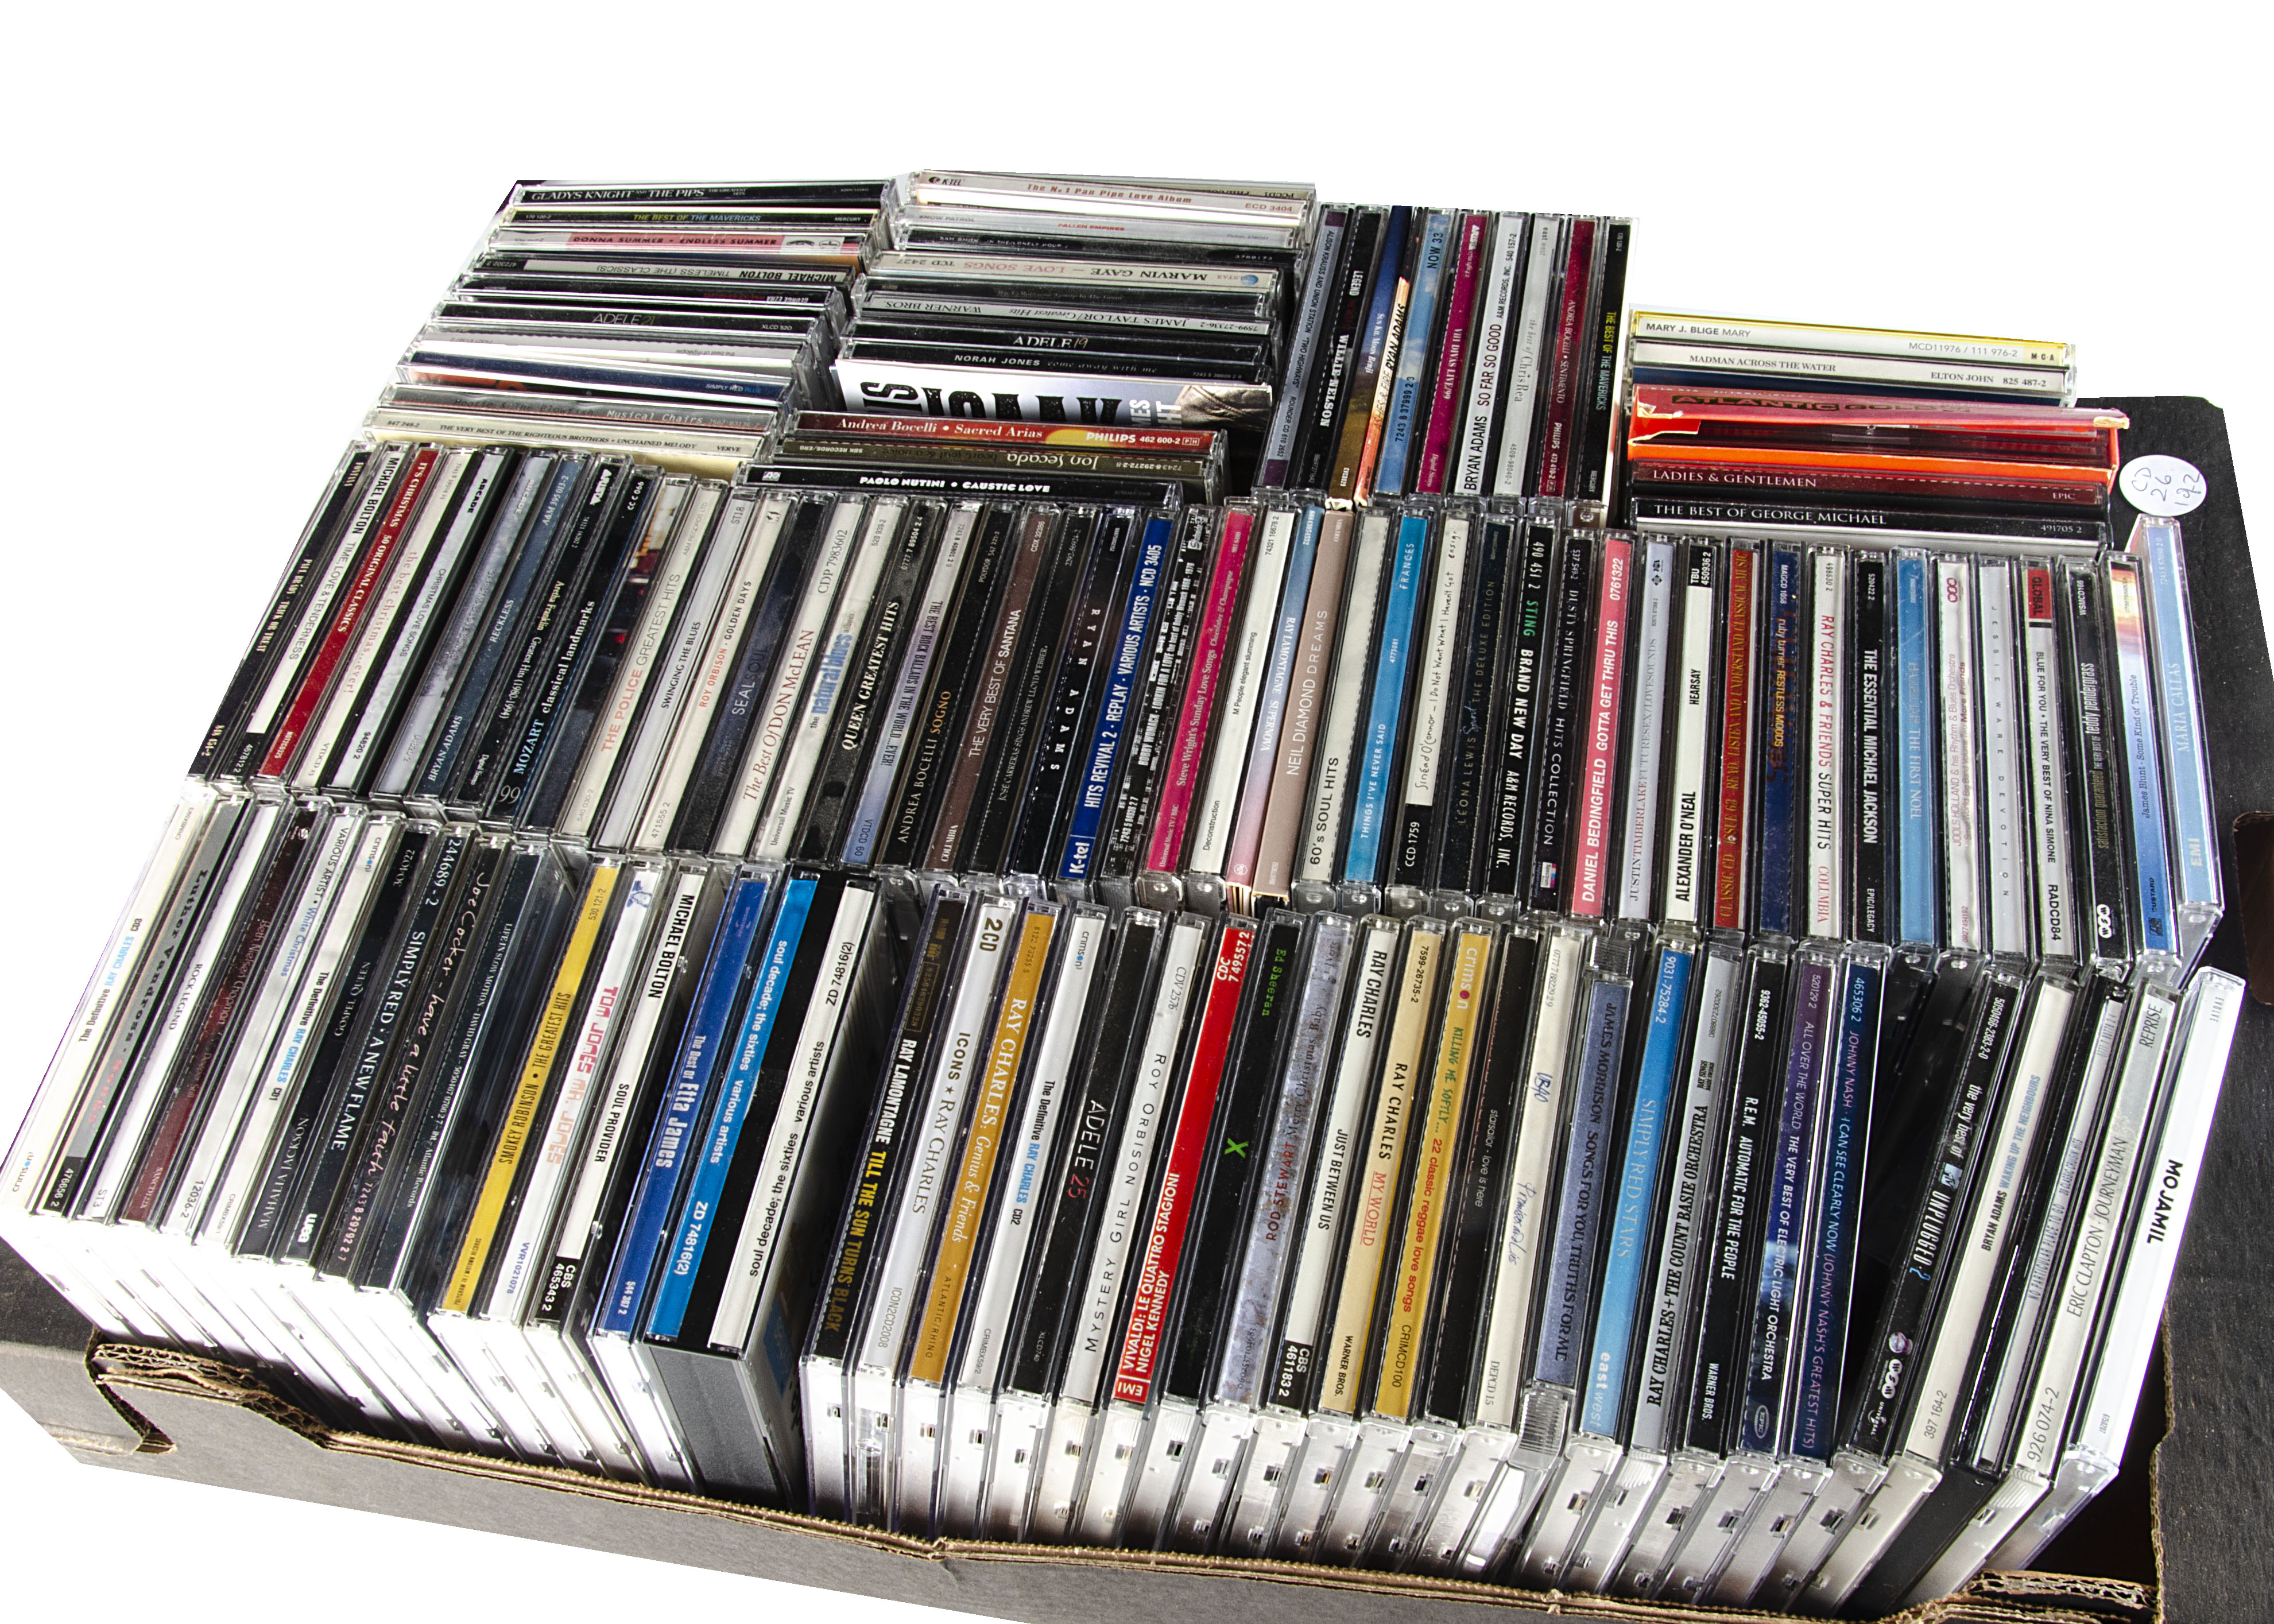 CDs, approximately three hundred CDs of various genres with artists including Stevie Wonder, Eva - Image 2 of 2